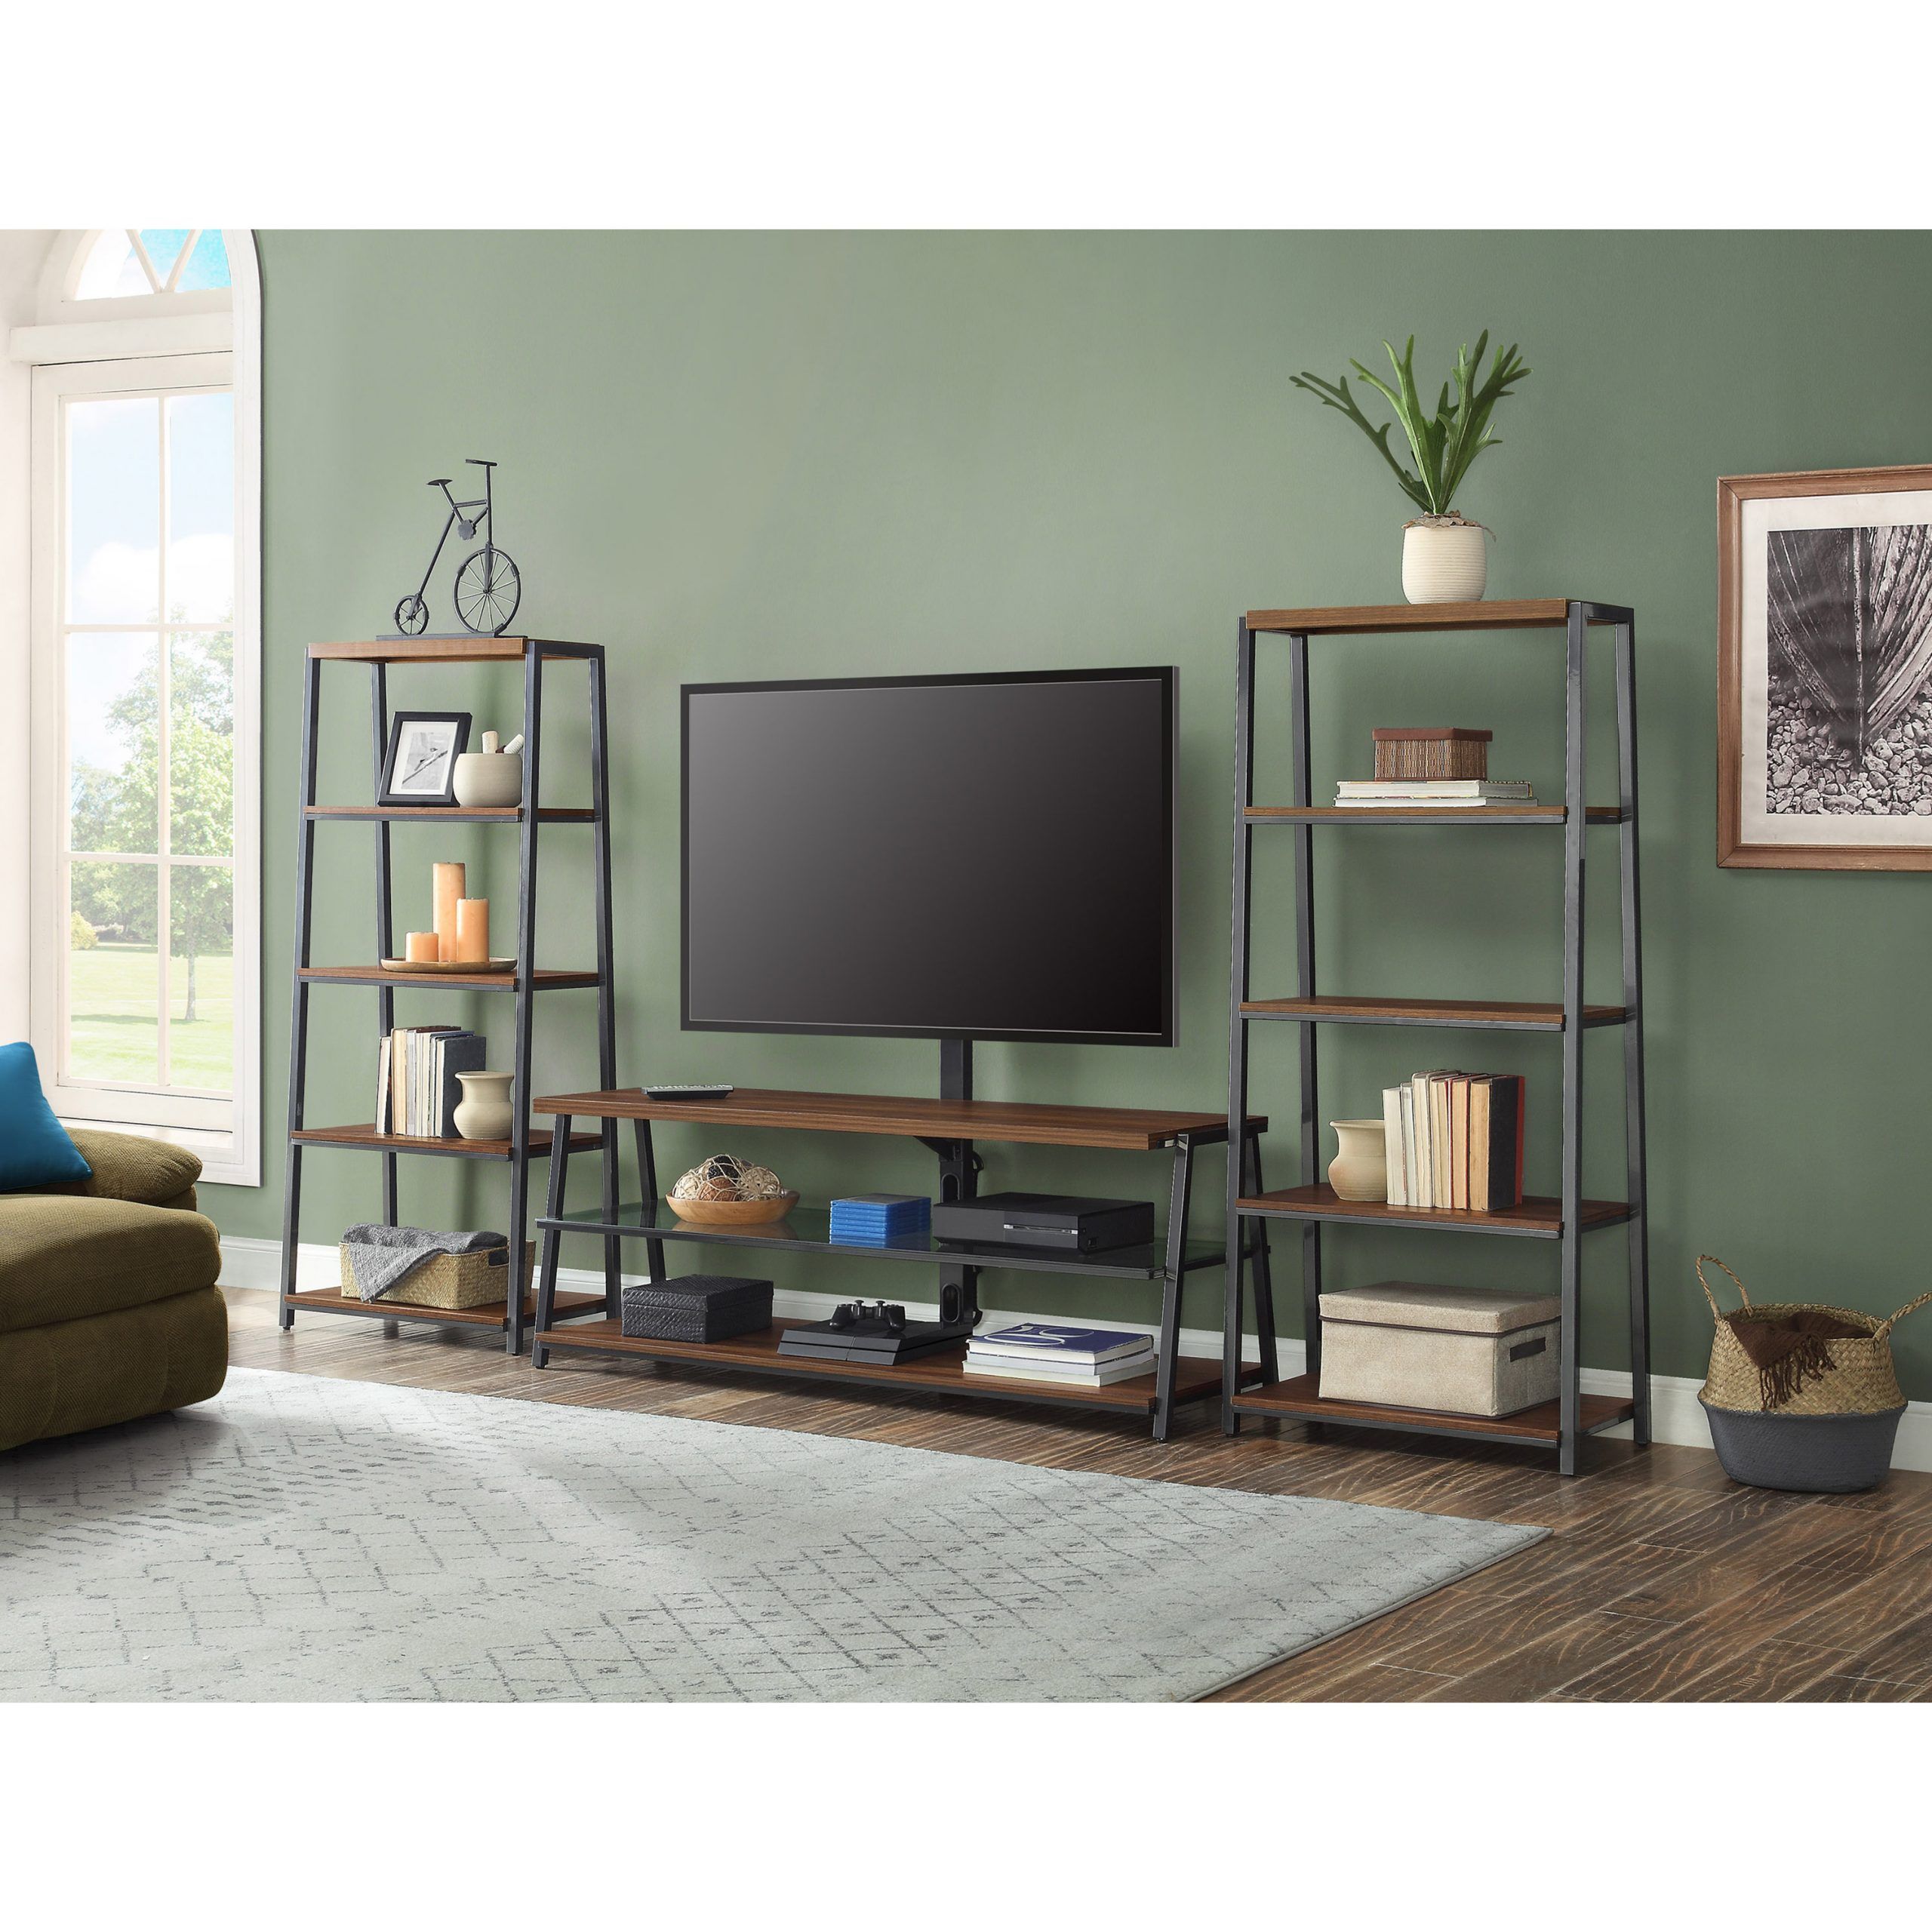 Mainstays Arris 3 In 1 Tv Stand For Televisions Up To 70 In Mainstays Arris 3 In 1 Tv Stands In Canyon Walnut Finish (View 14 of 20)